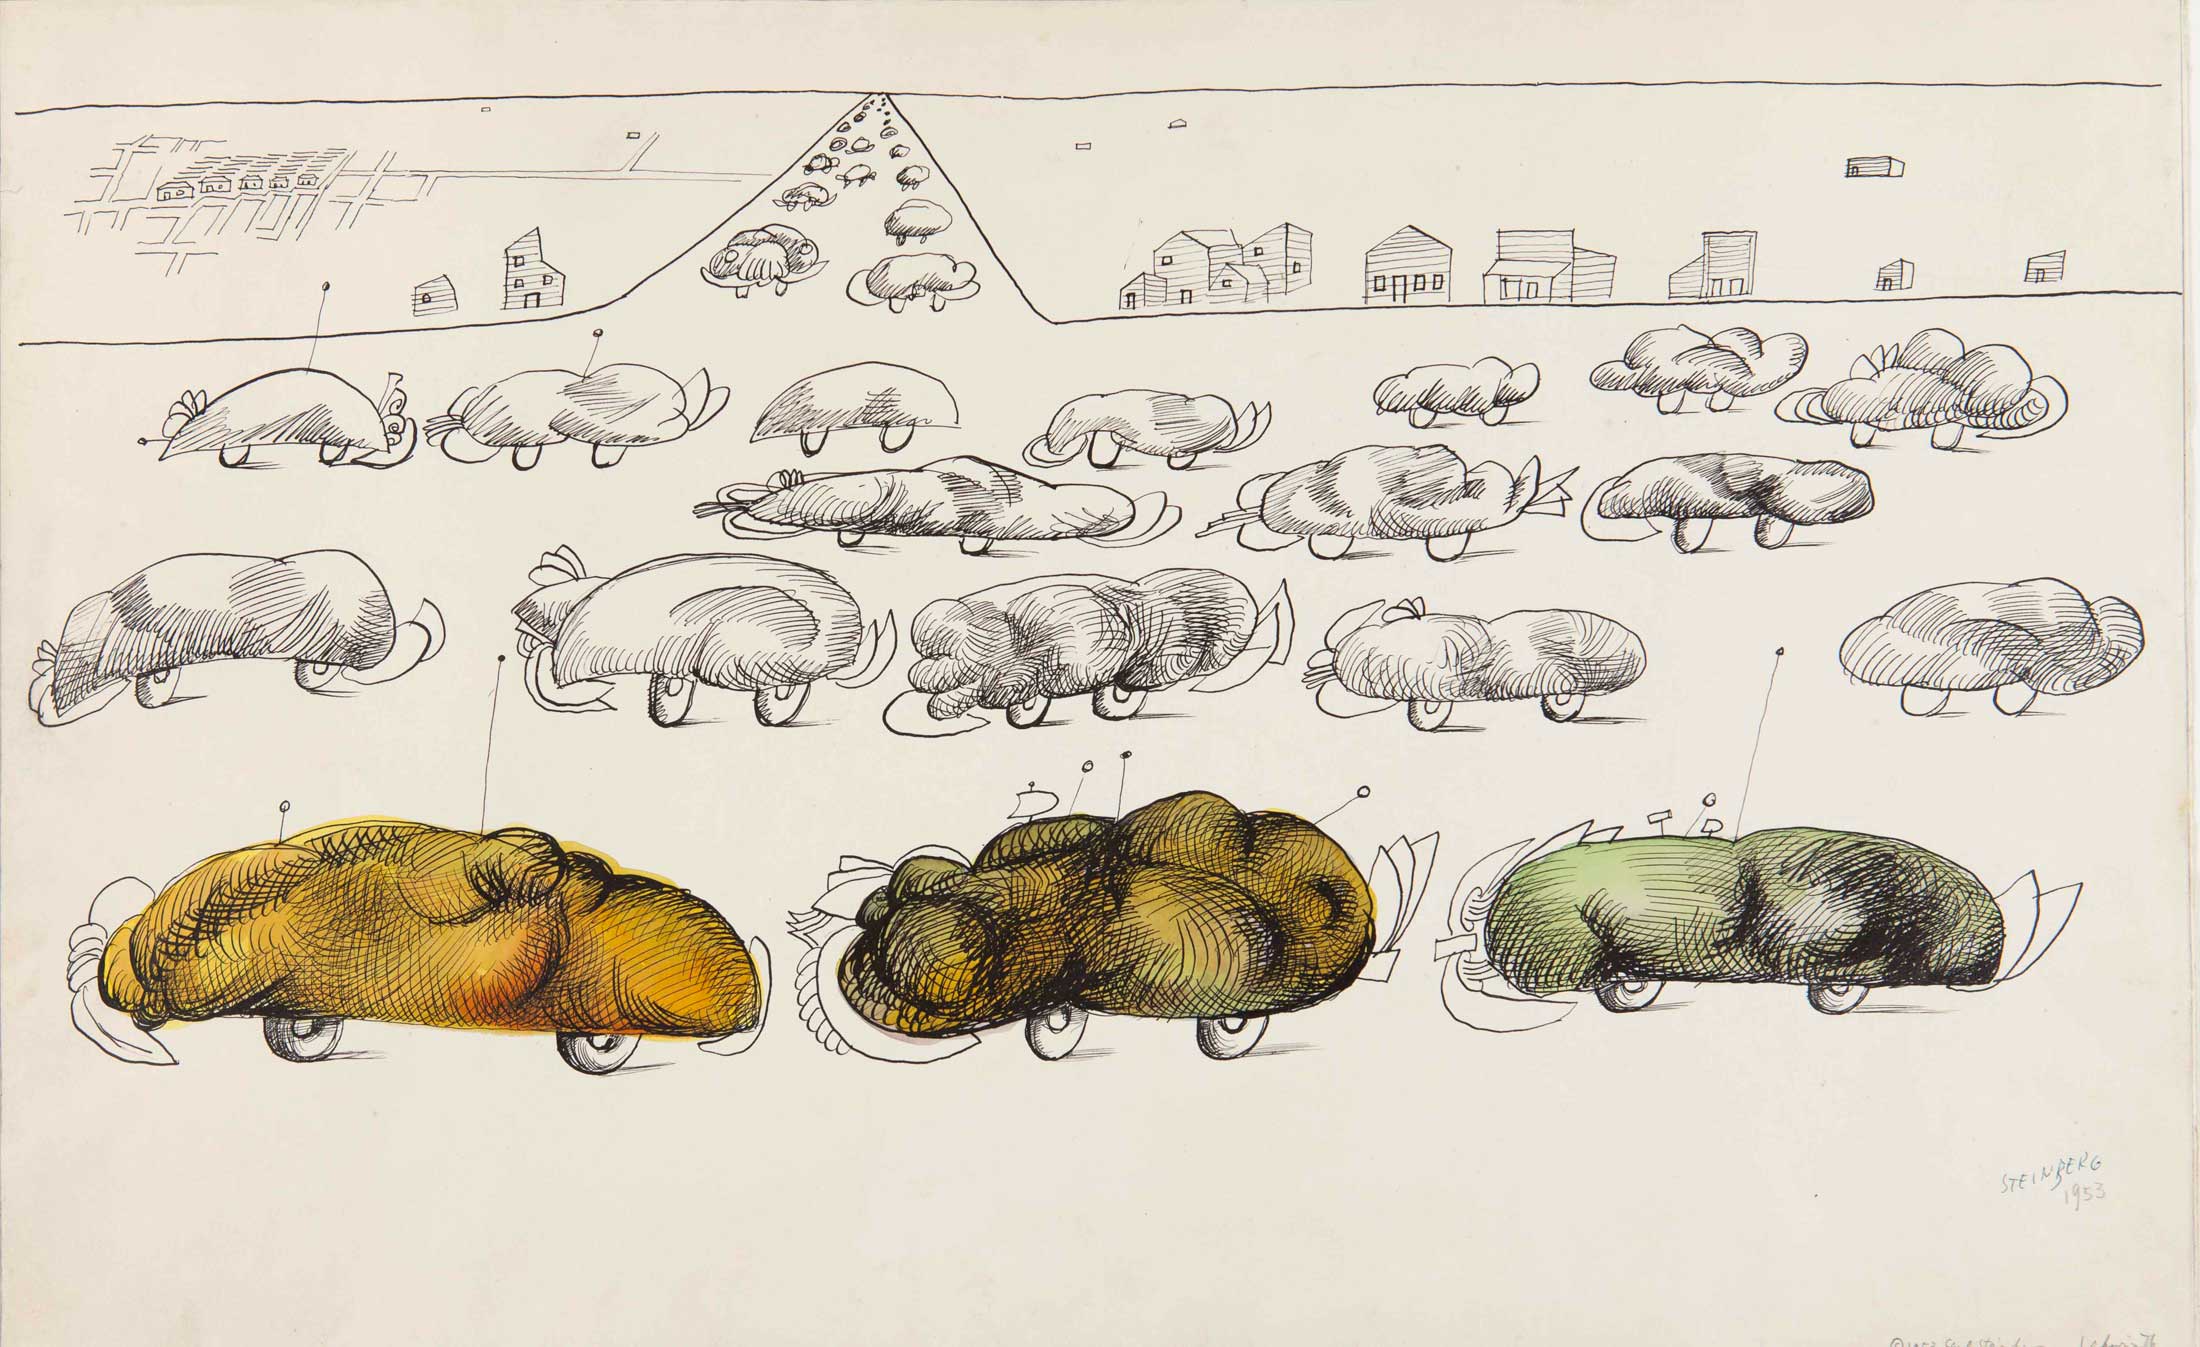 <em>Highway Traffic</em>, 1953. Ink, watercolor, and pencil on paper, 14 ½ x 23 in. The Saul Steinberg Foundation.